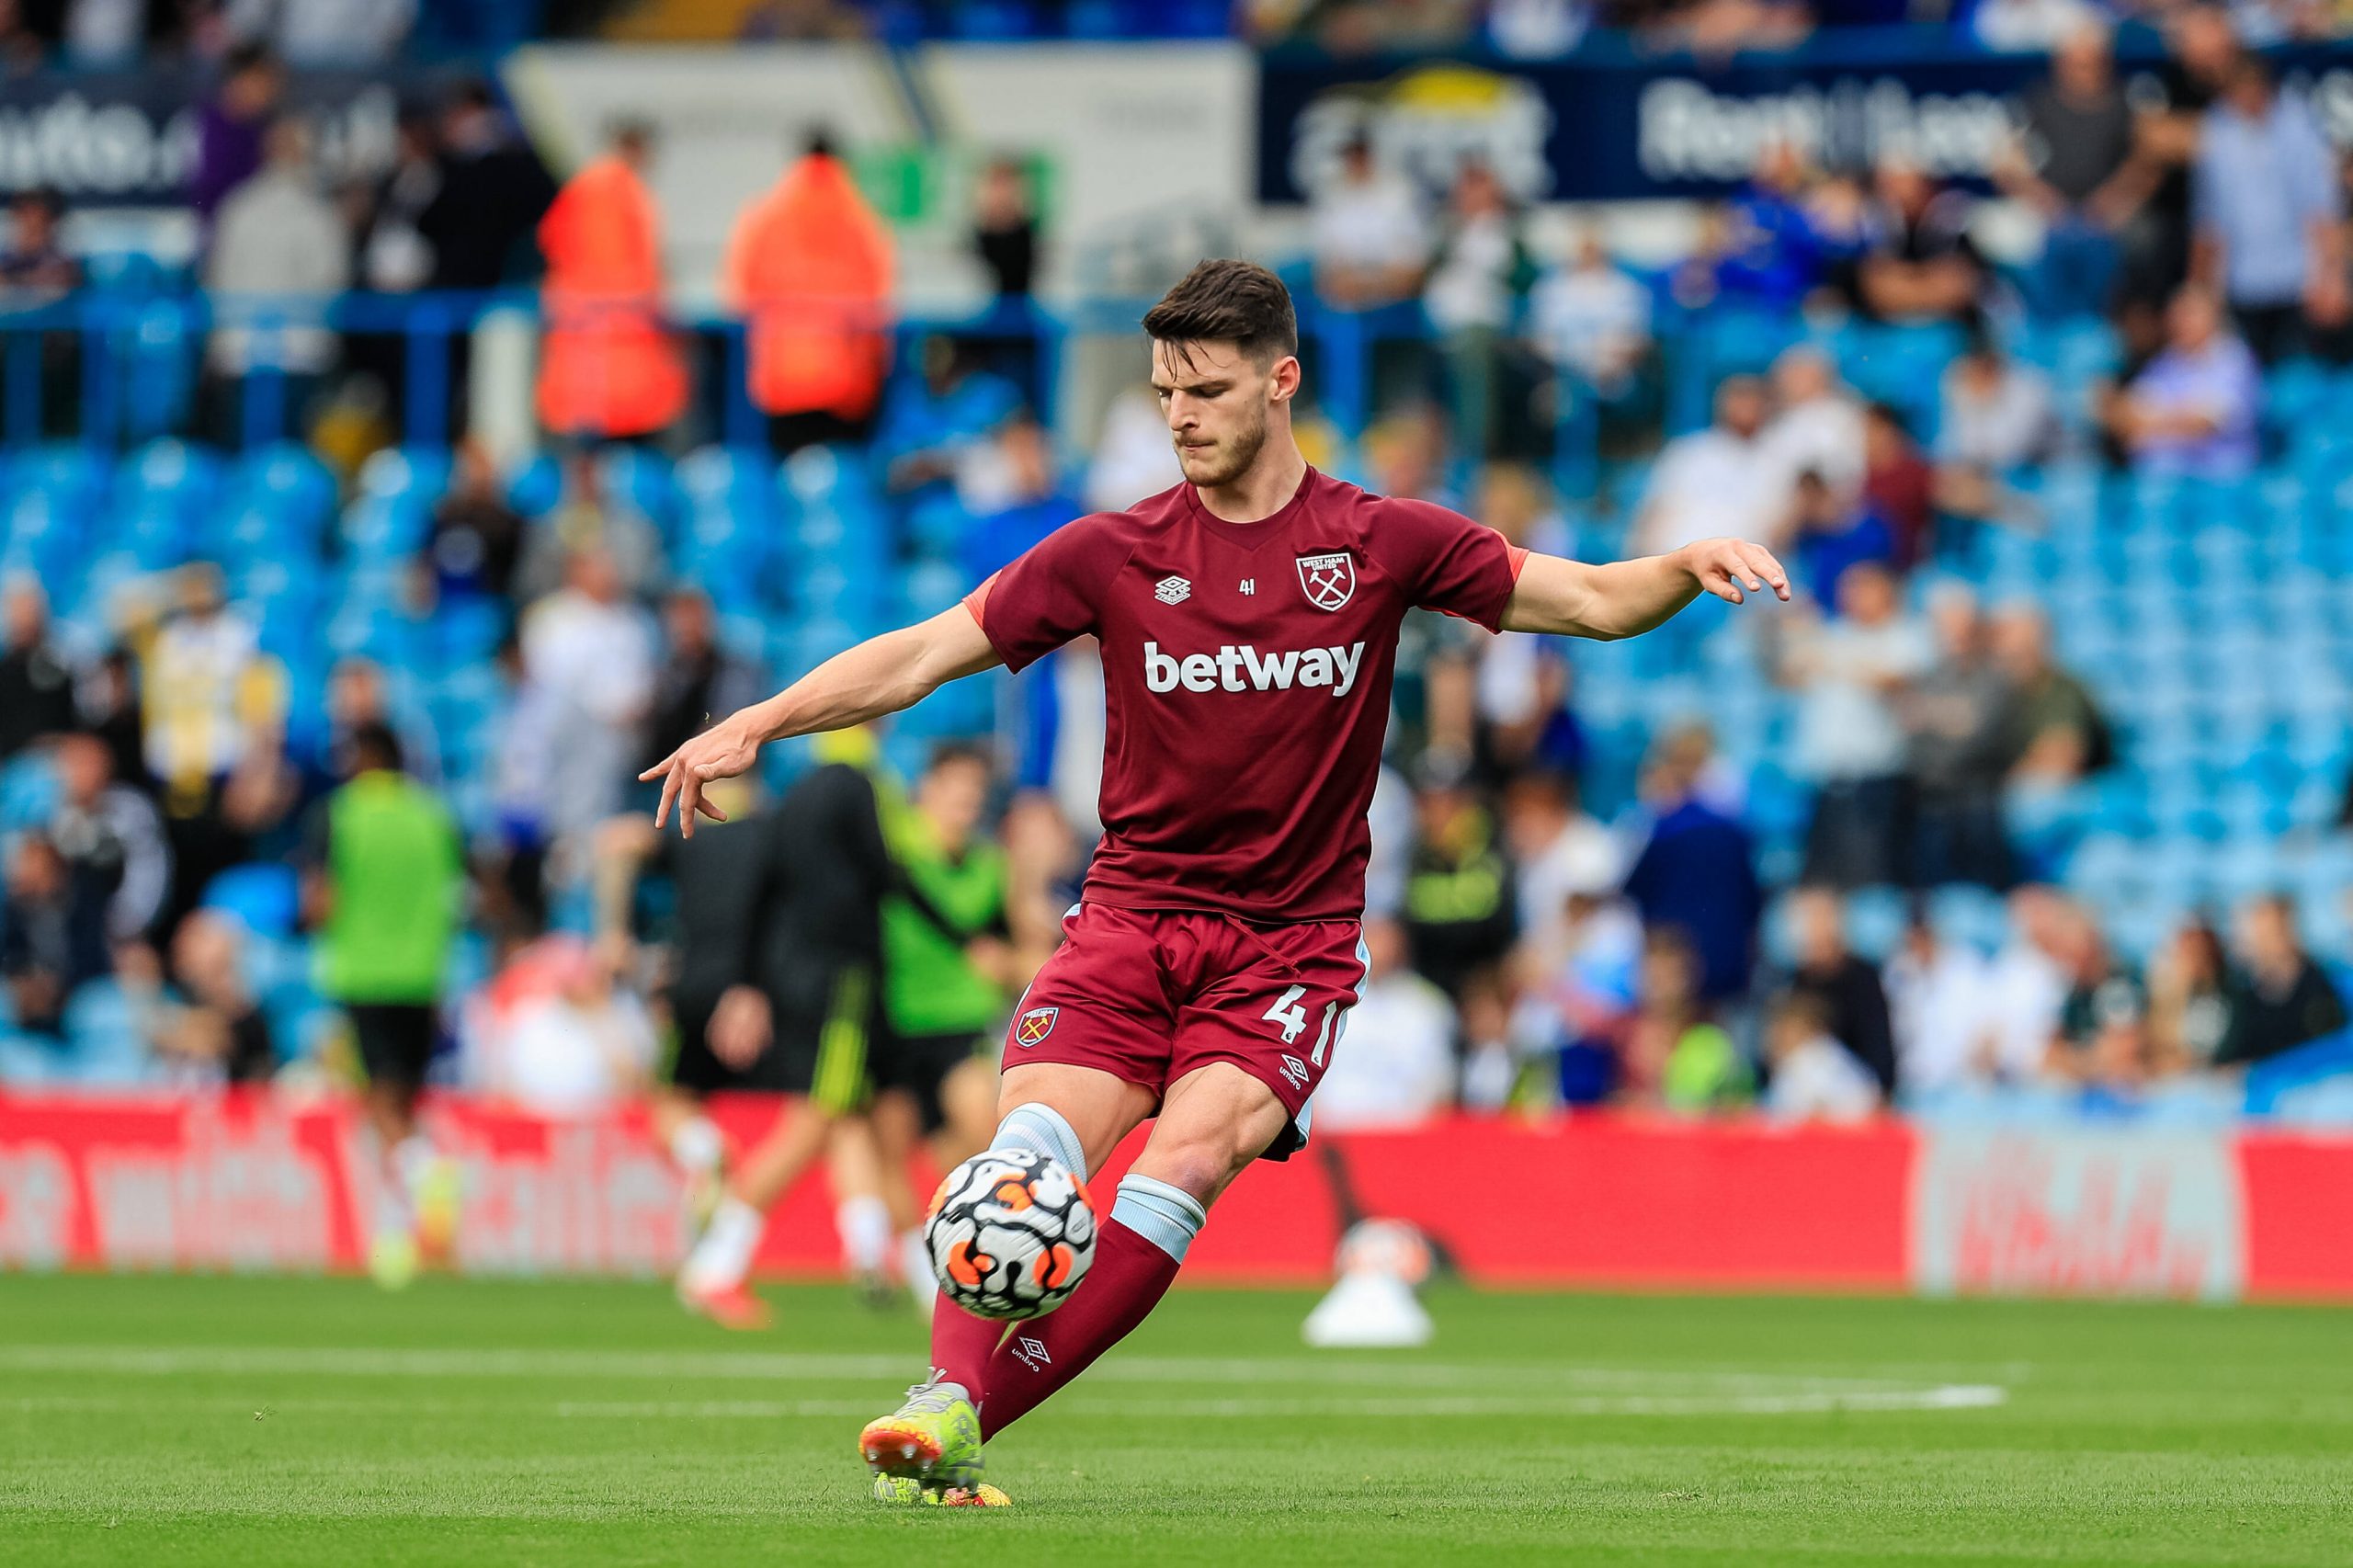 Manchester United are ready to sign Declan Rice in the summer after the appointment of a permanent manager.